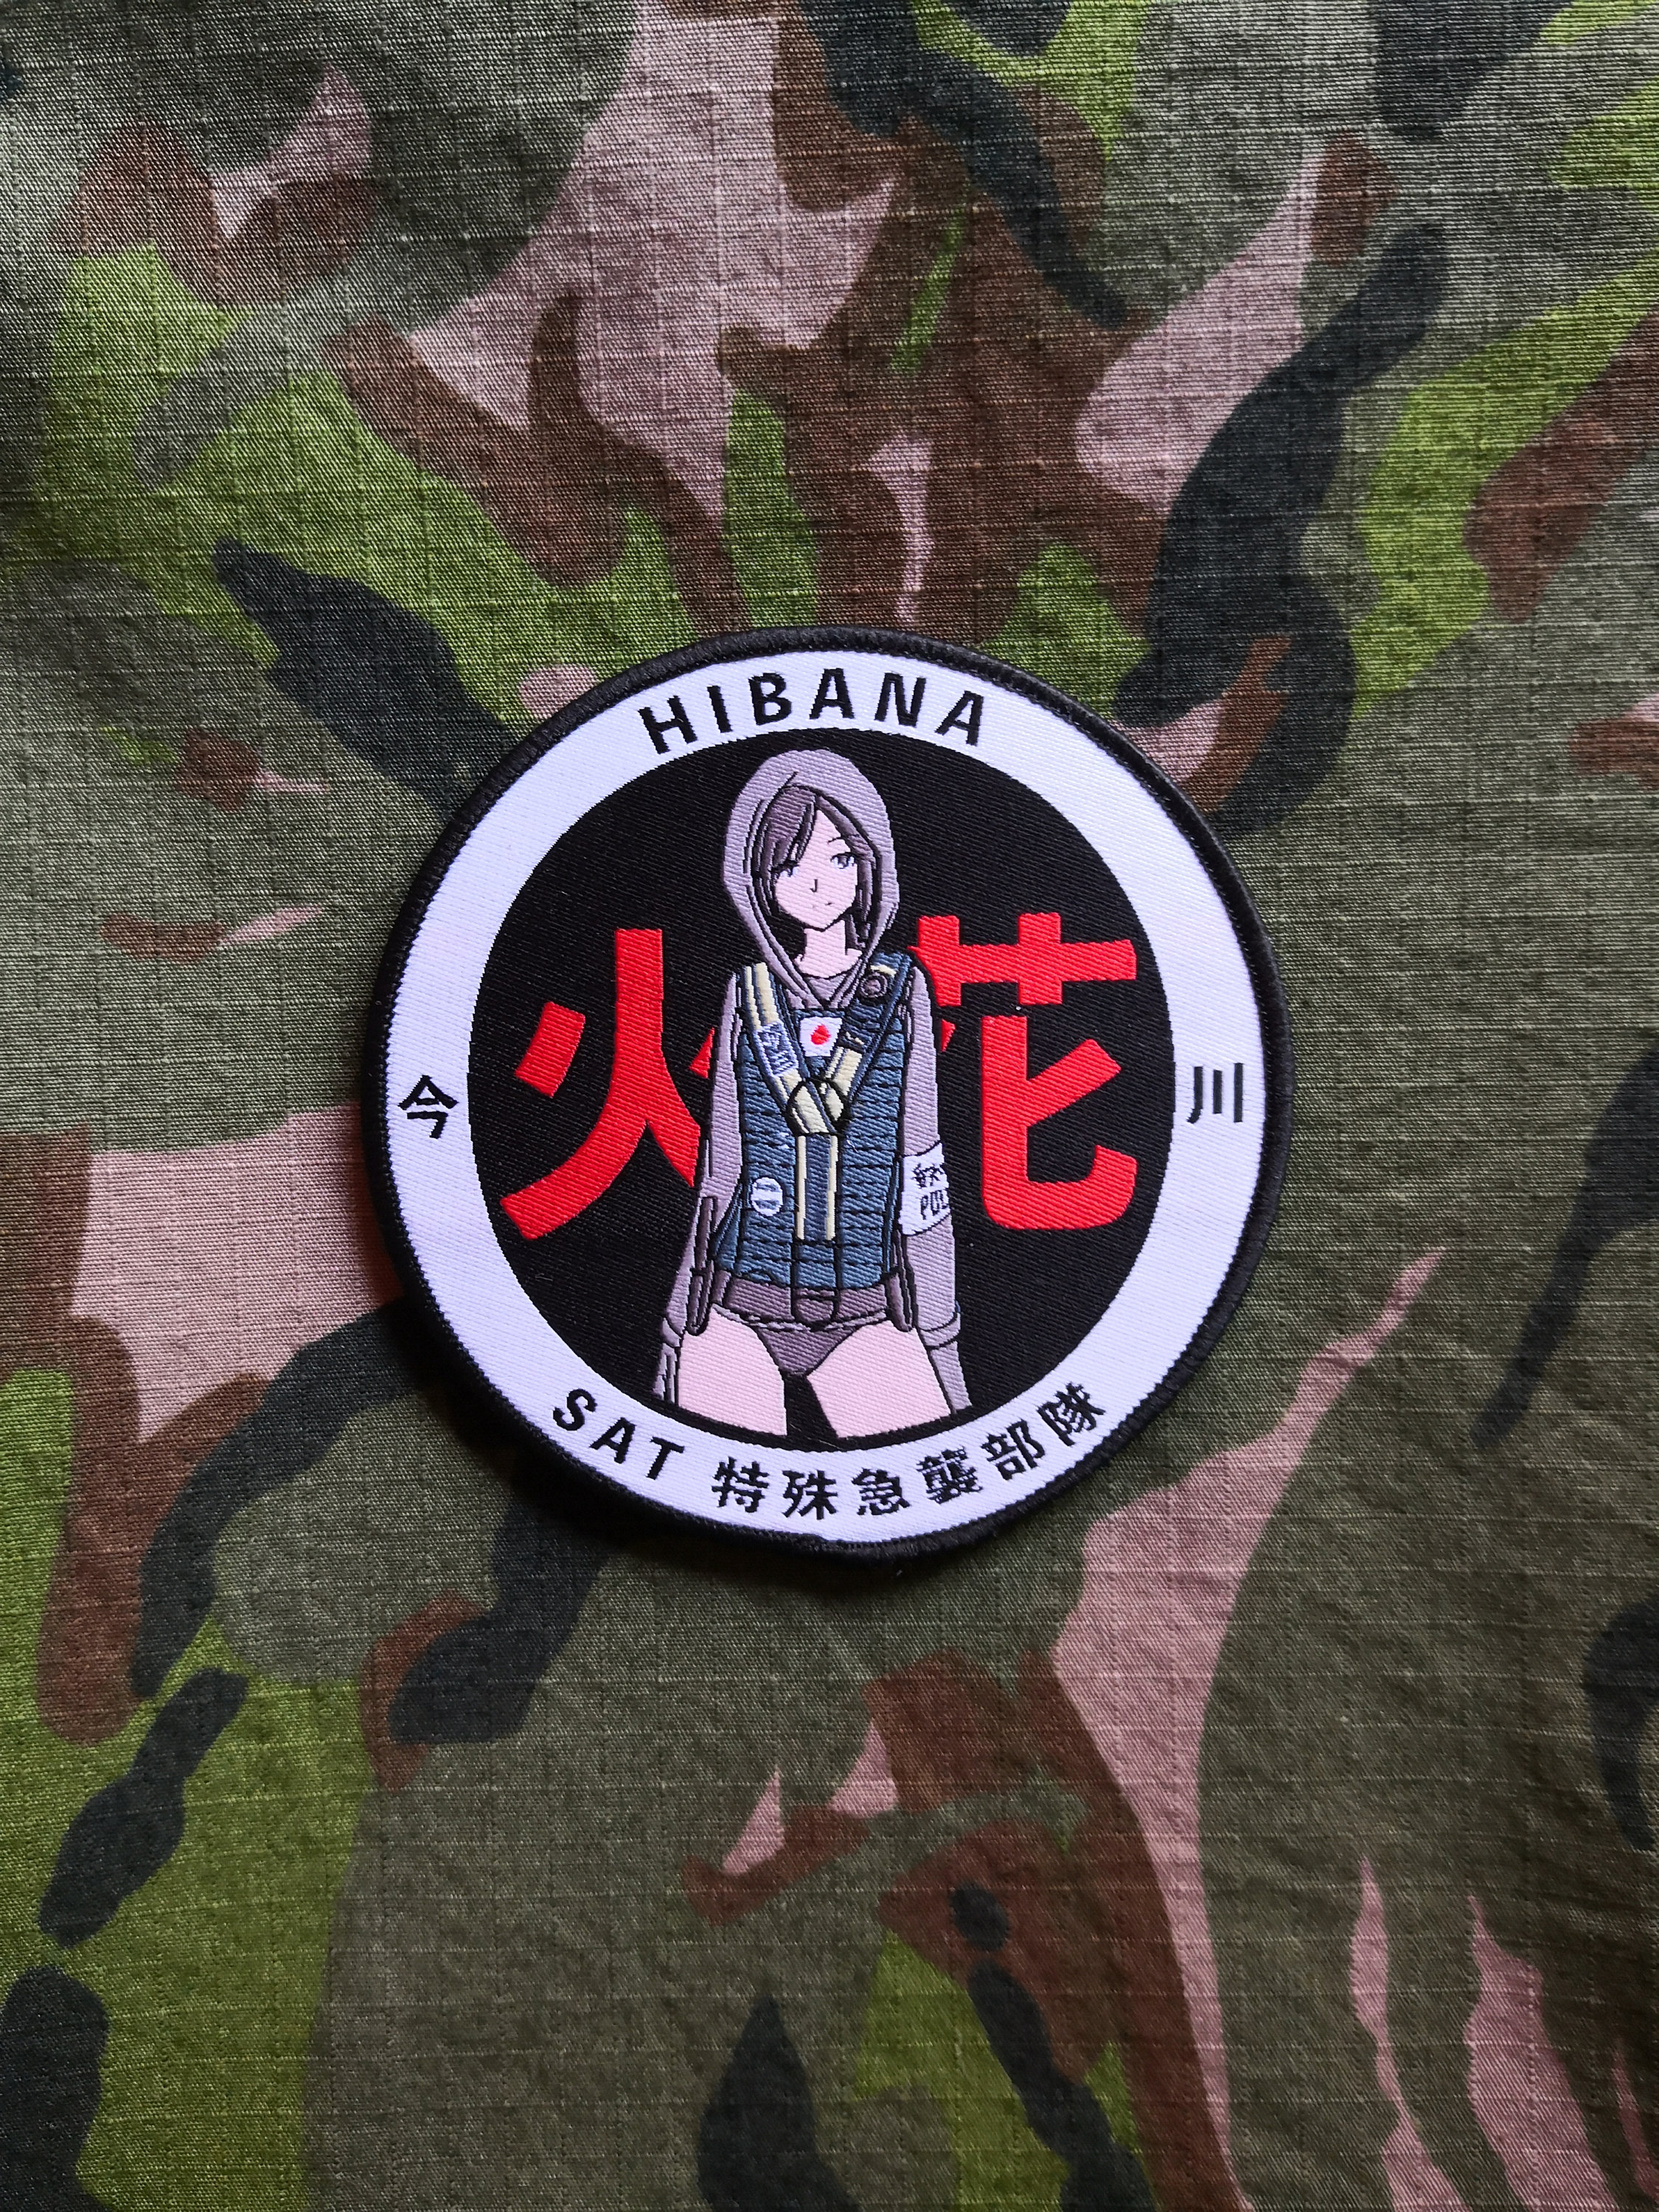 Counter-Terrorism JSDF SAT (Special Assault Team) military morale patch -  Hibby Version